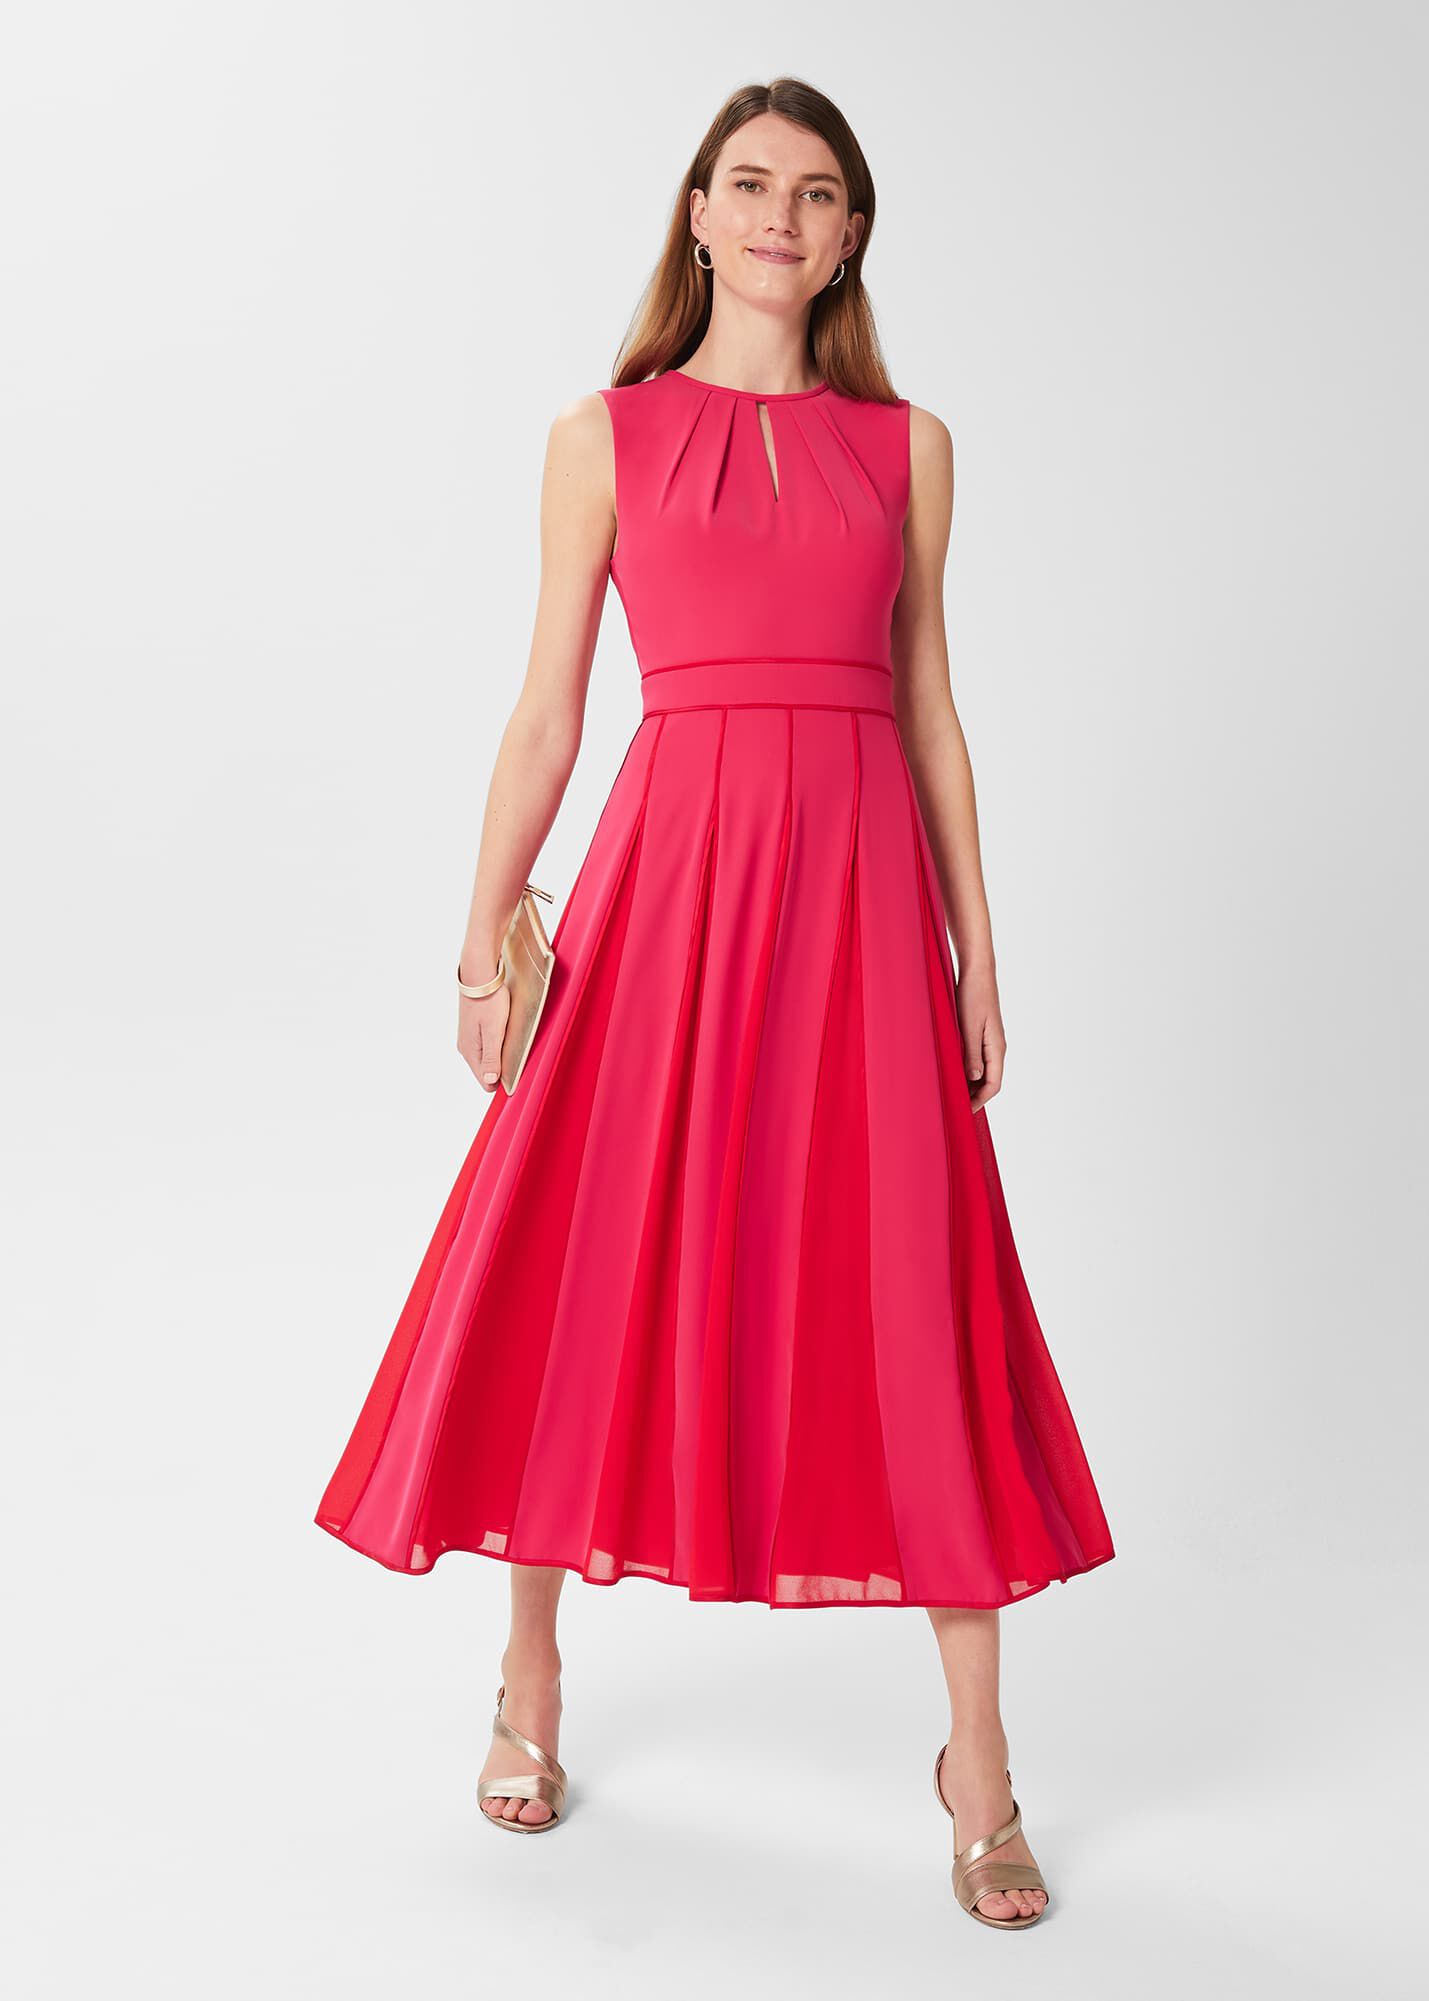 Raspberry Pink Puff Sleeve Pleated Fit & Flare Dress